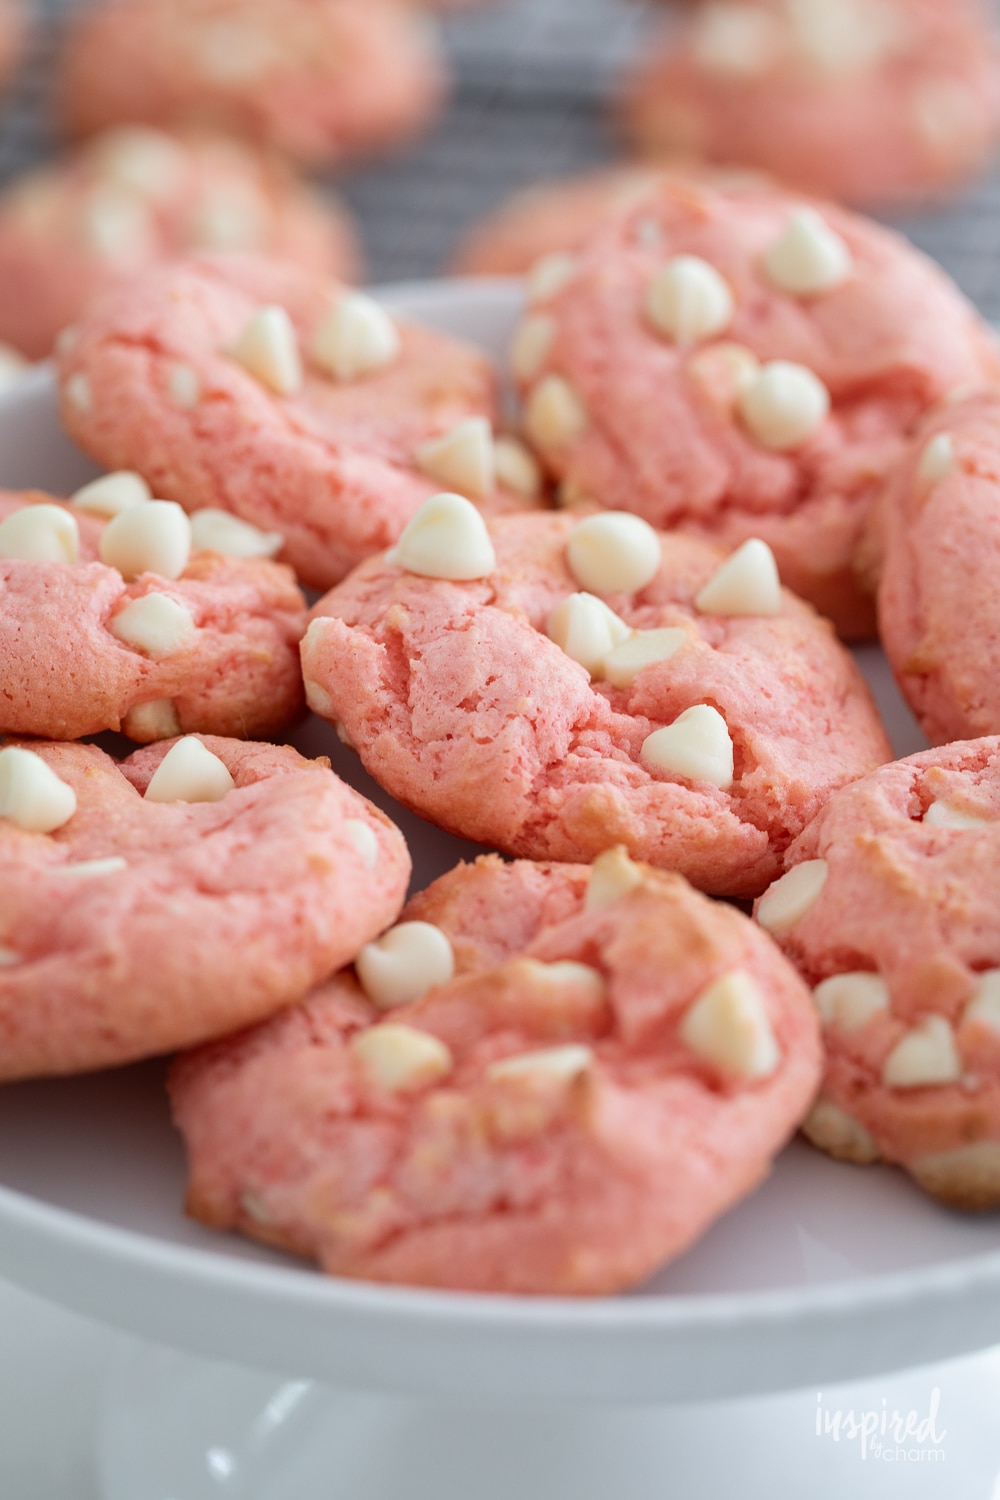 Dye Free Strawberry Cookies - The Whole Cook